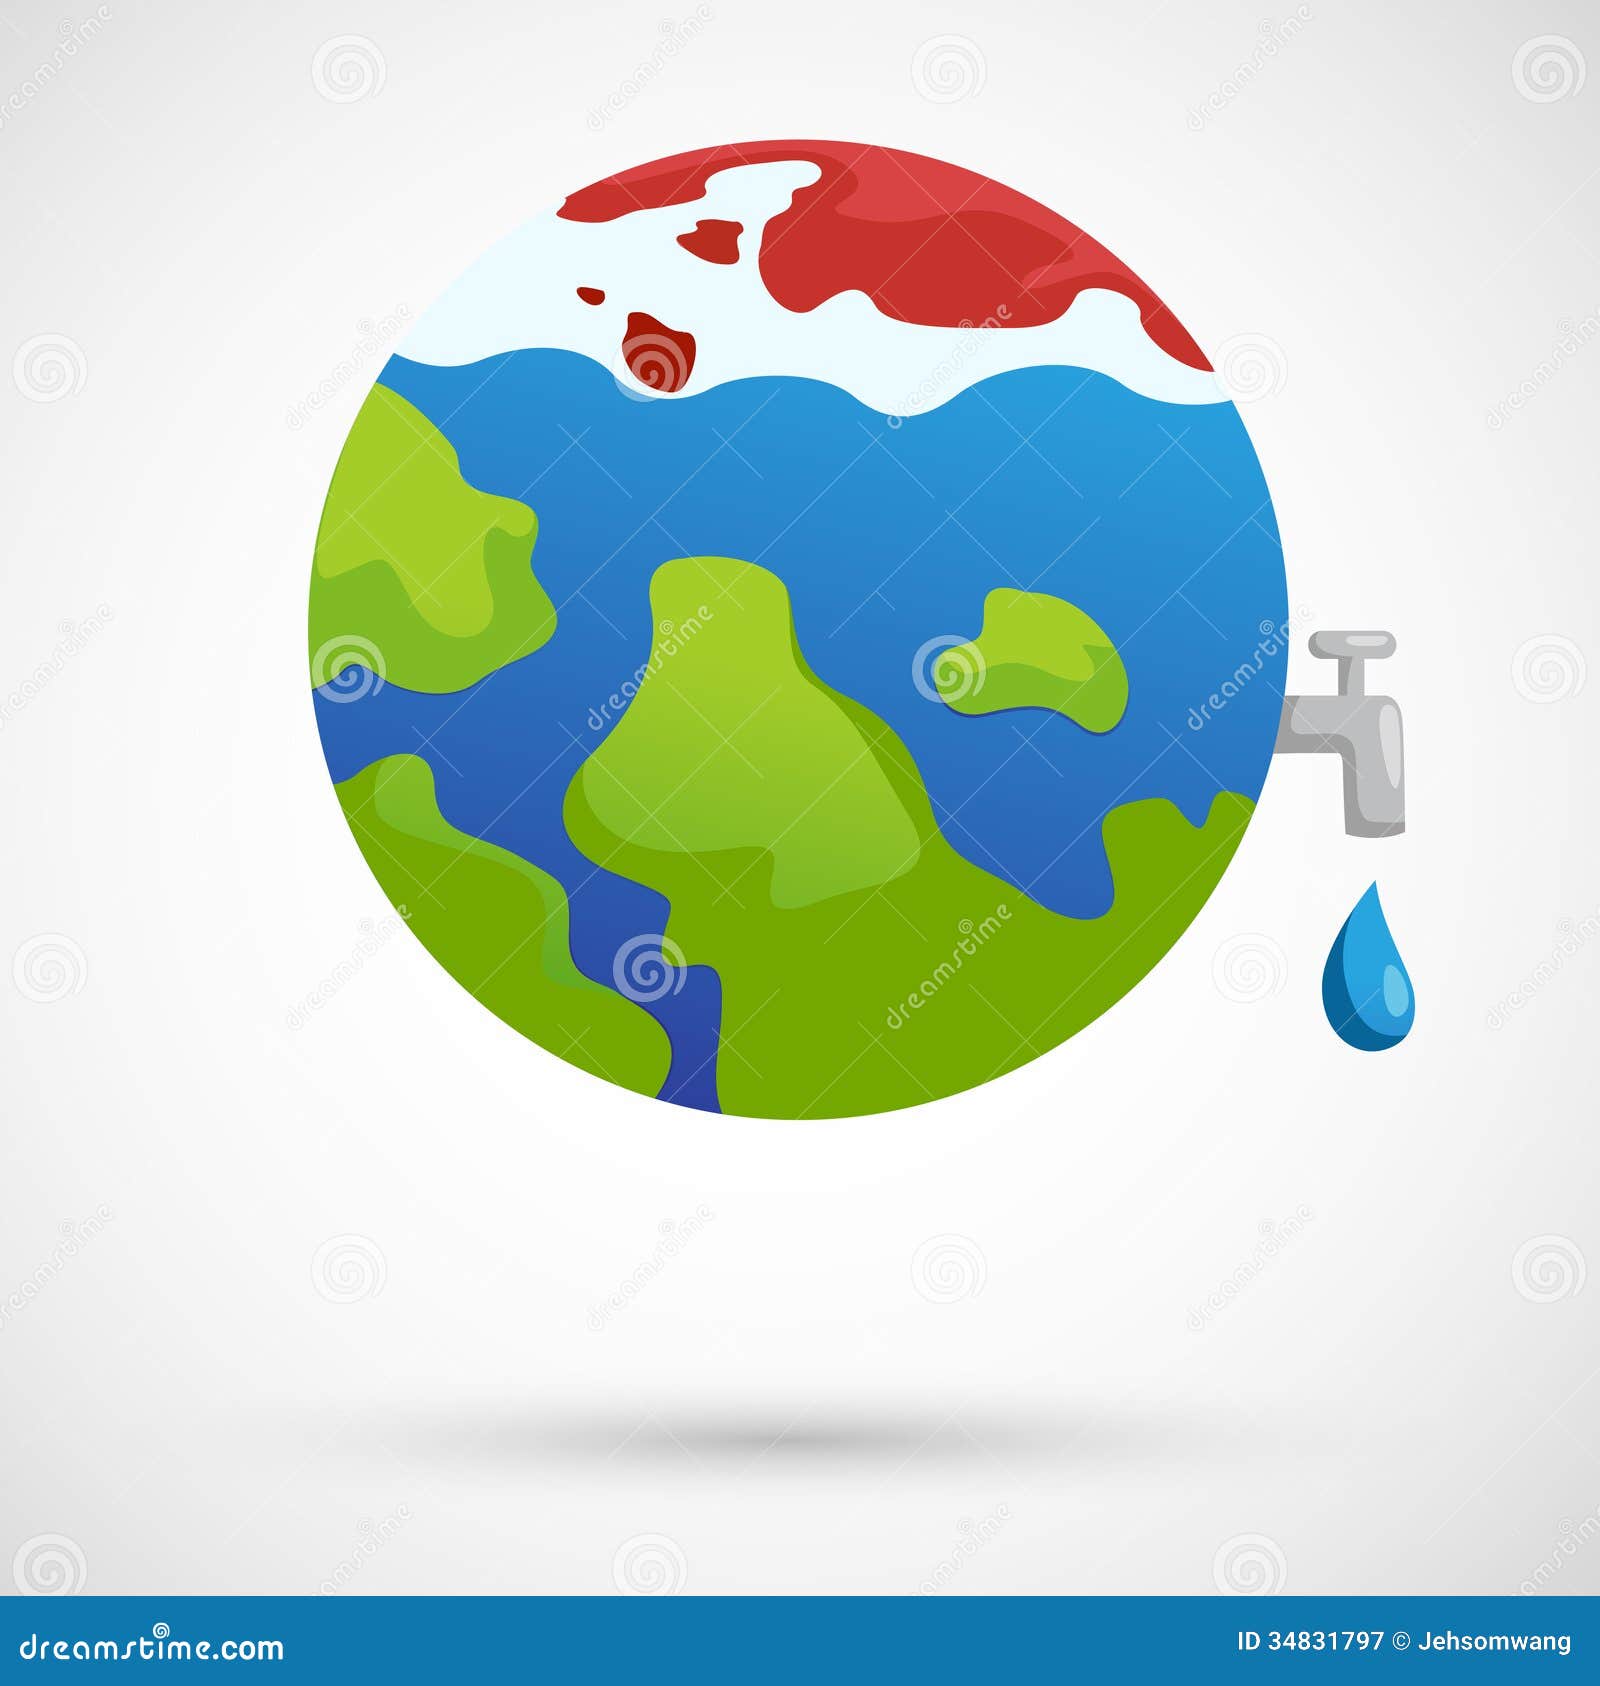 global warming clipart - photo #30